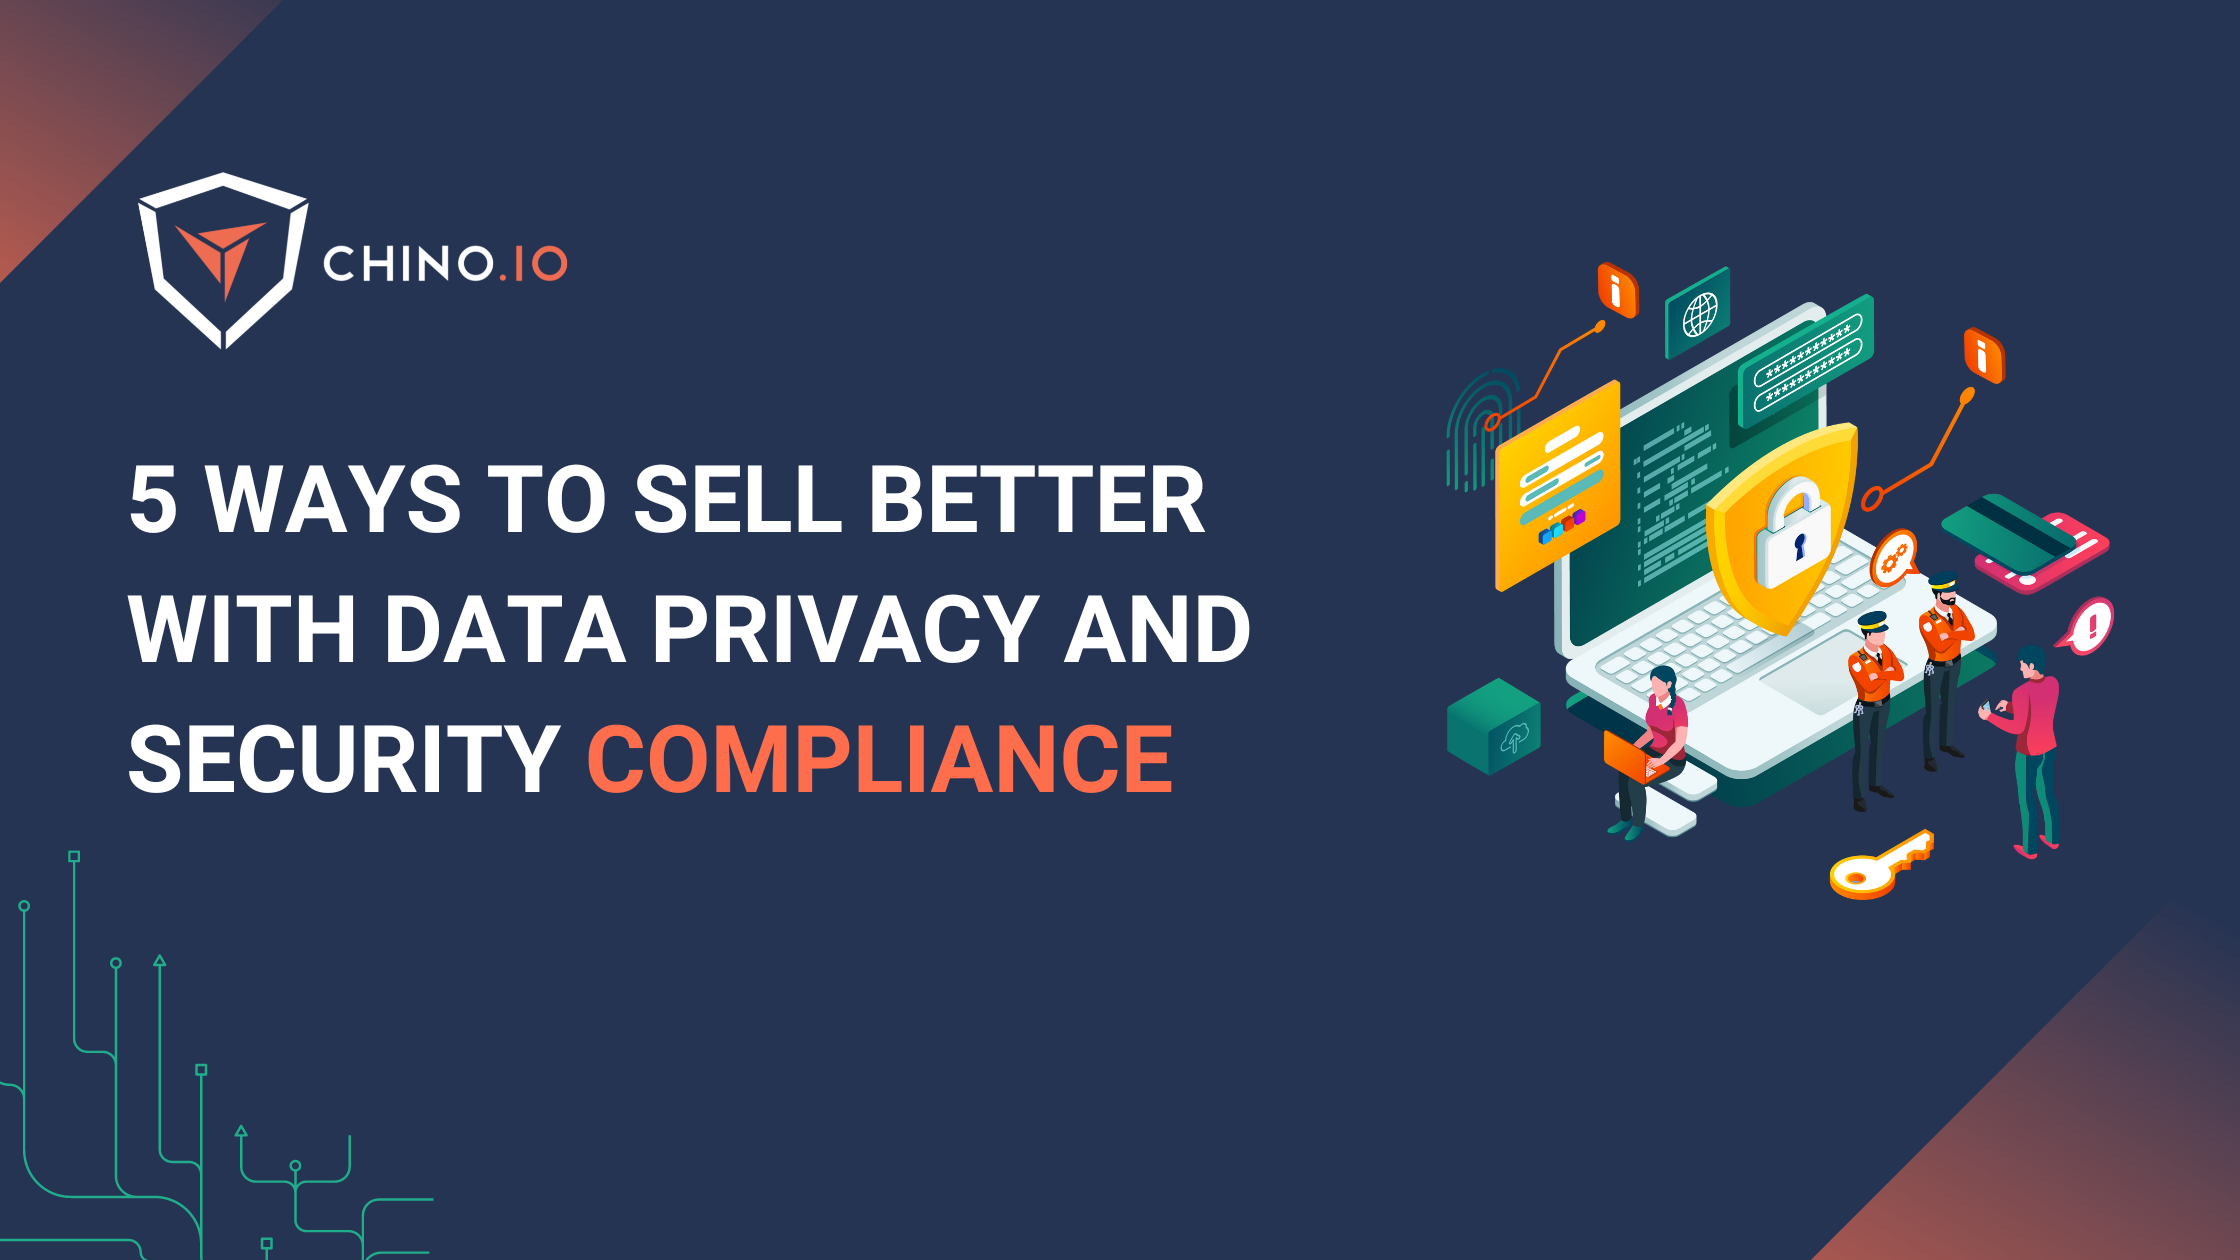 5 ways to strengthen your company’s reputation through compliance on blue background and image of data privacy measures